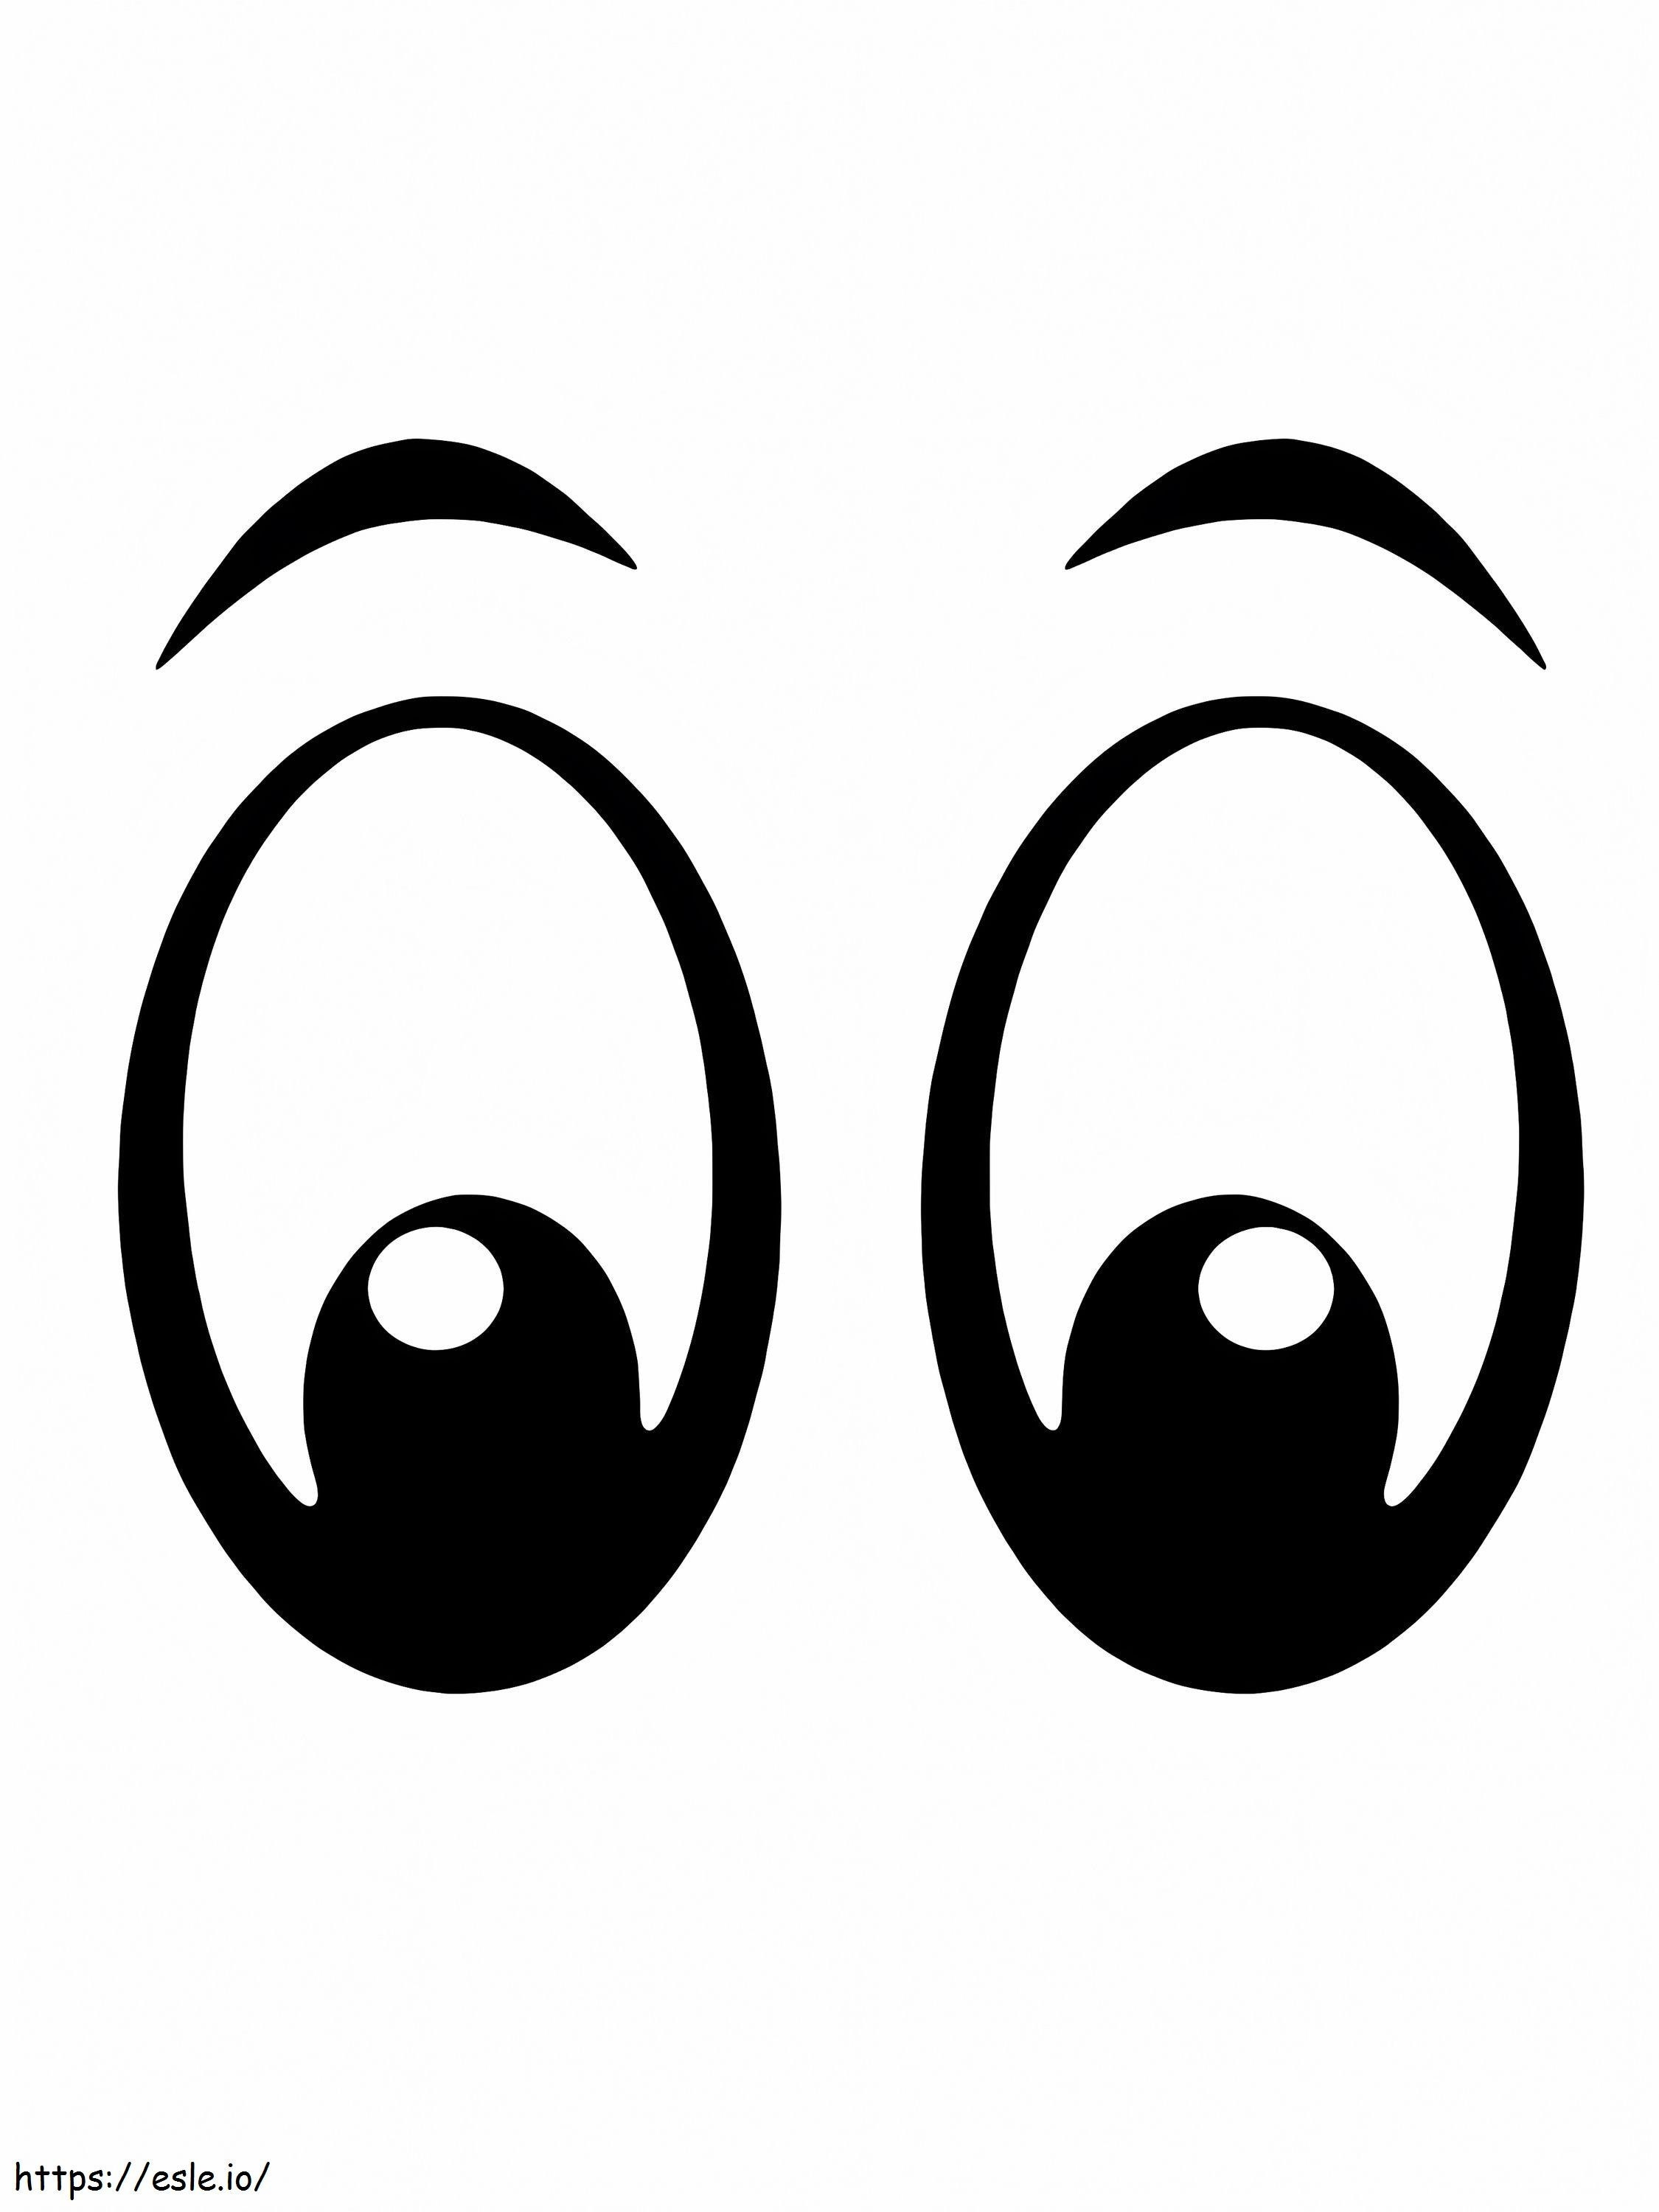 Funny Eyes coloring page